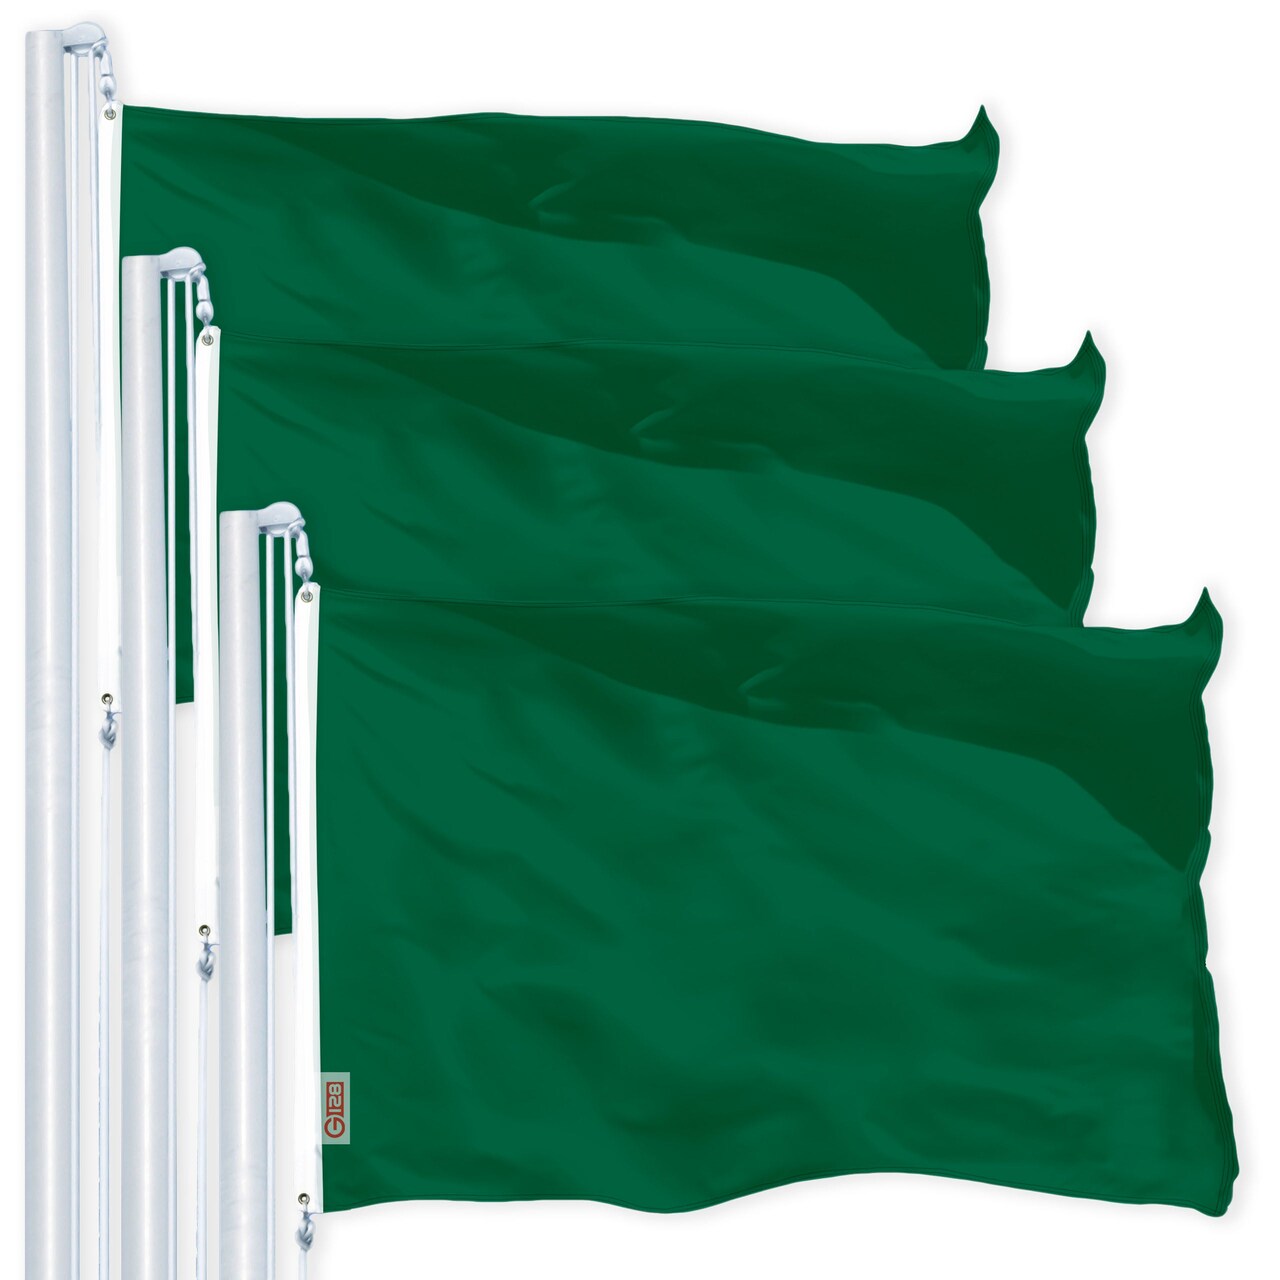 G128 3 Pack: Solid Dark Green Color Flag | 4x6 Ft | LiteWeave Pro Series Printed 150D Polyester | Indoor/Outdoor, Vibrant Colors, Brass Grommets